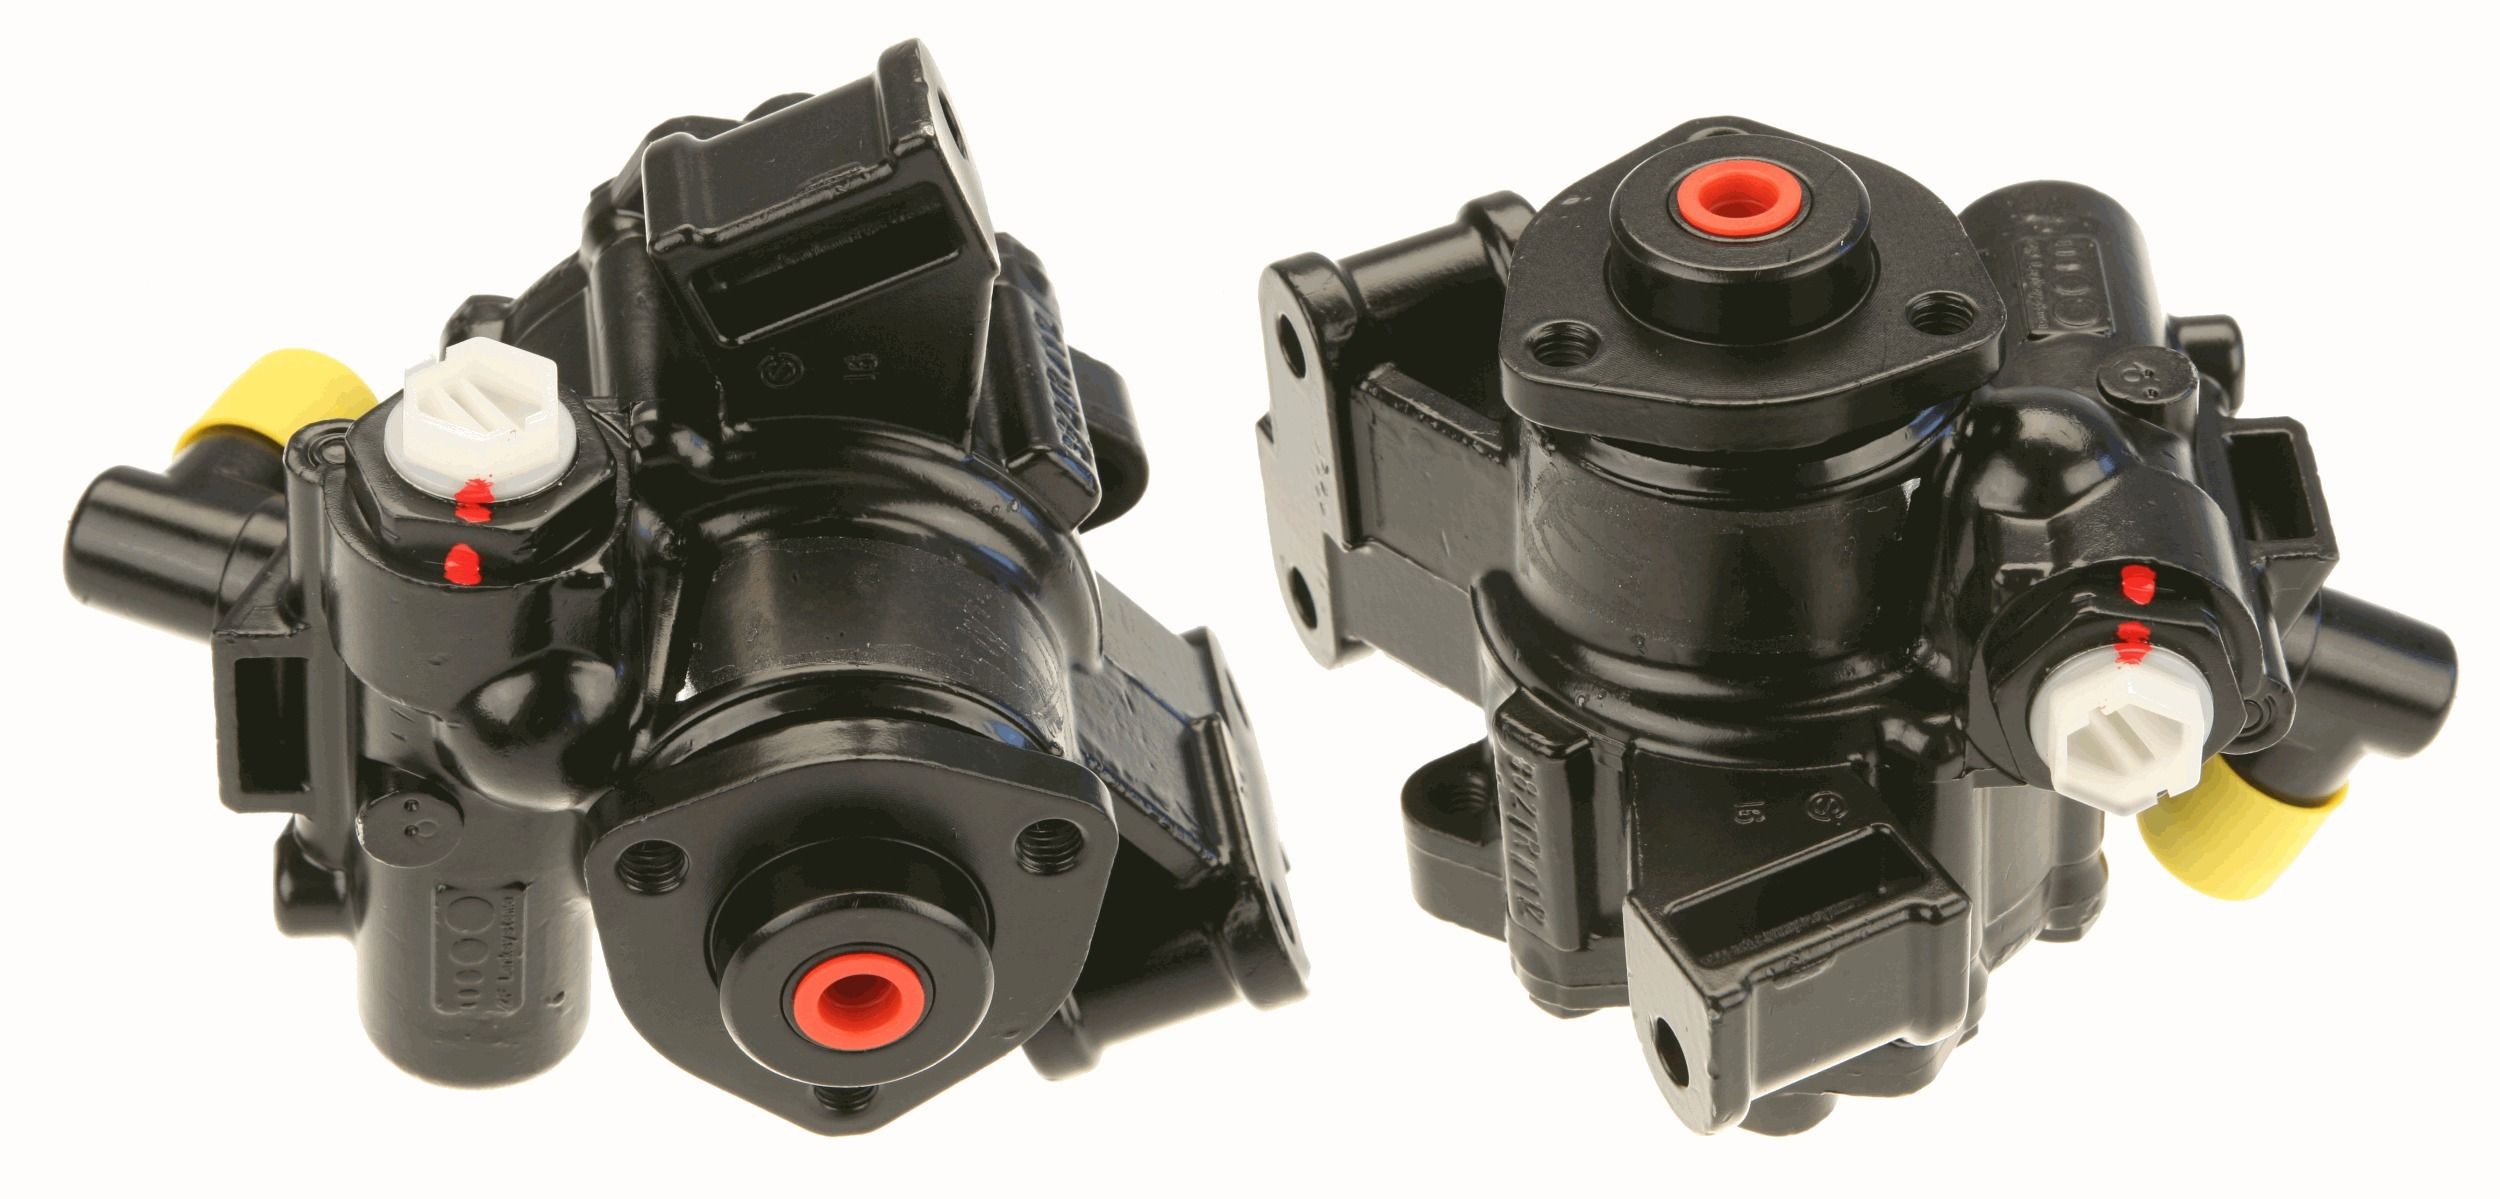 TRW JPR562 Power steering pump Hydraulic, M16x1.5, for left-hand/right-hand drive vehicles